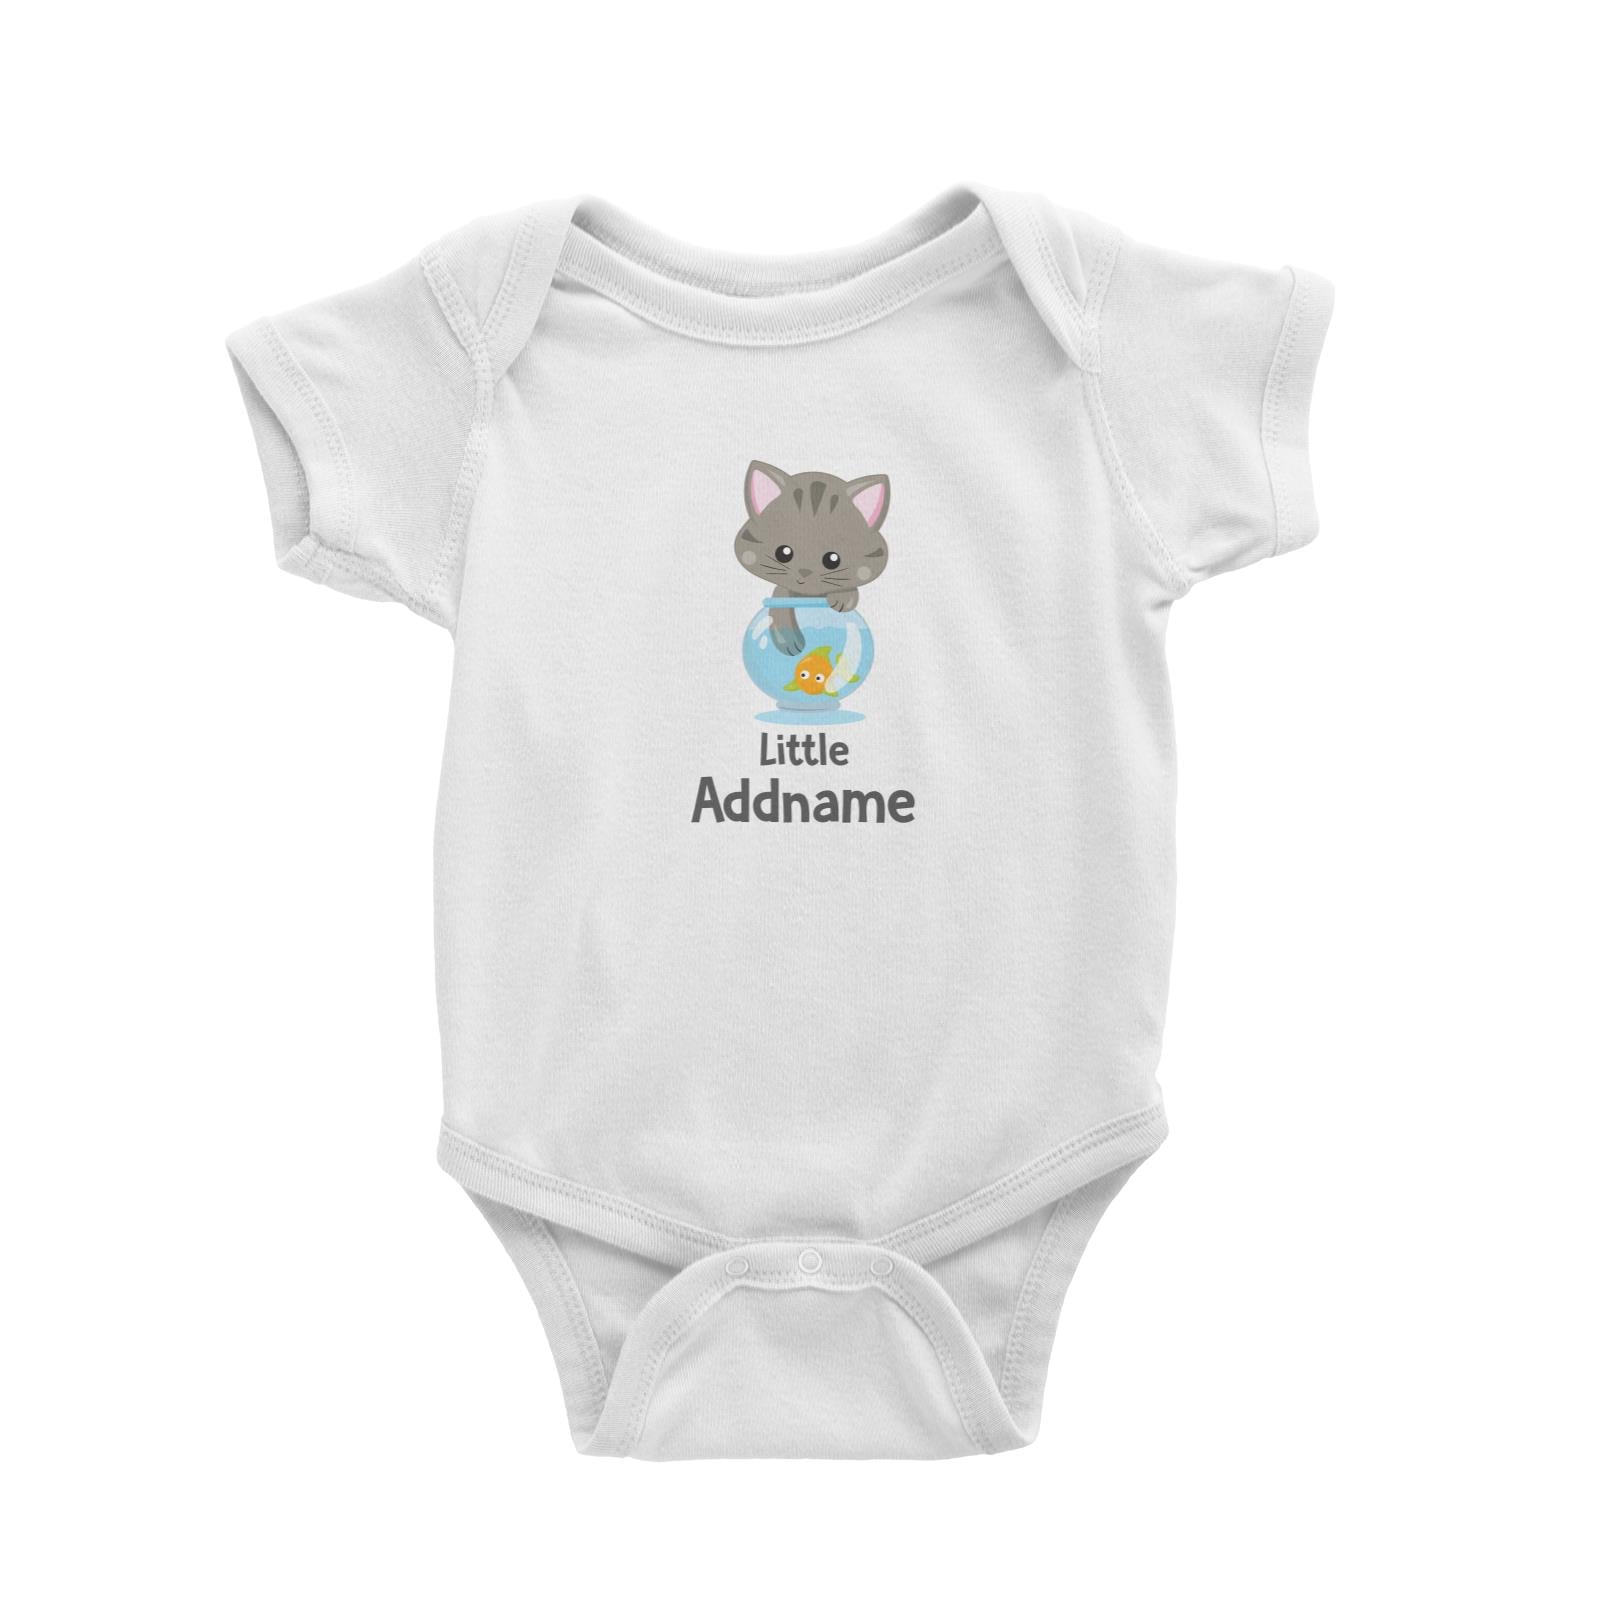 Adorable Cats Grey Cat Playing With Fish Bowl Little Addname White Baby Romper